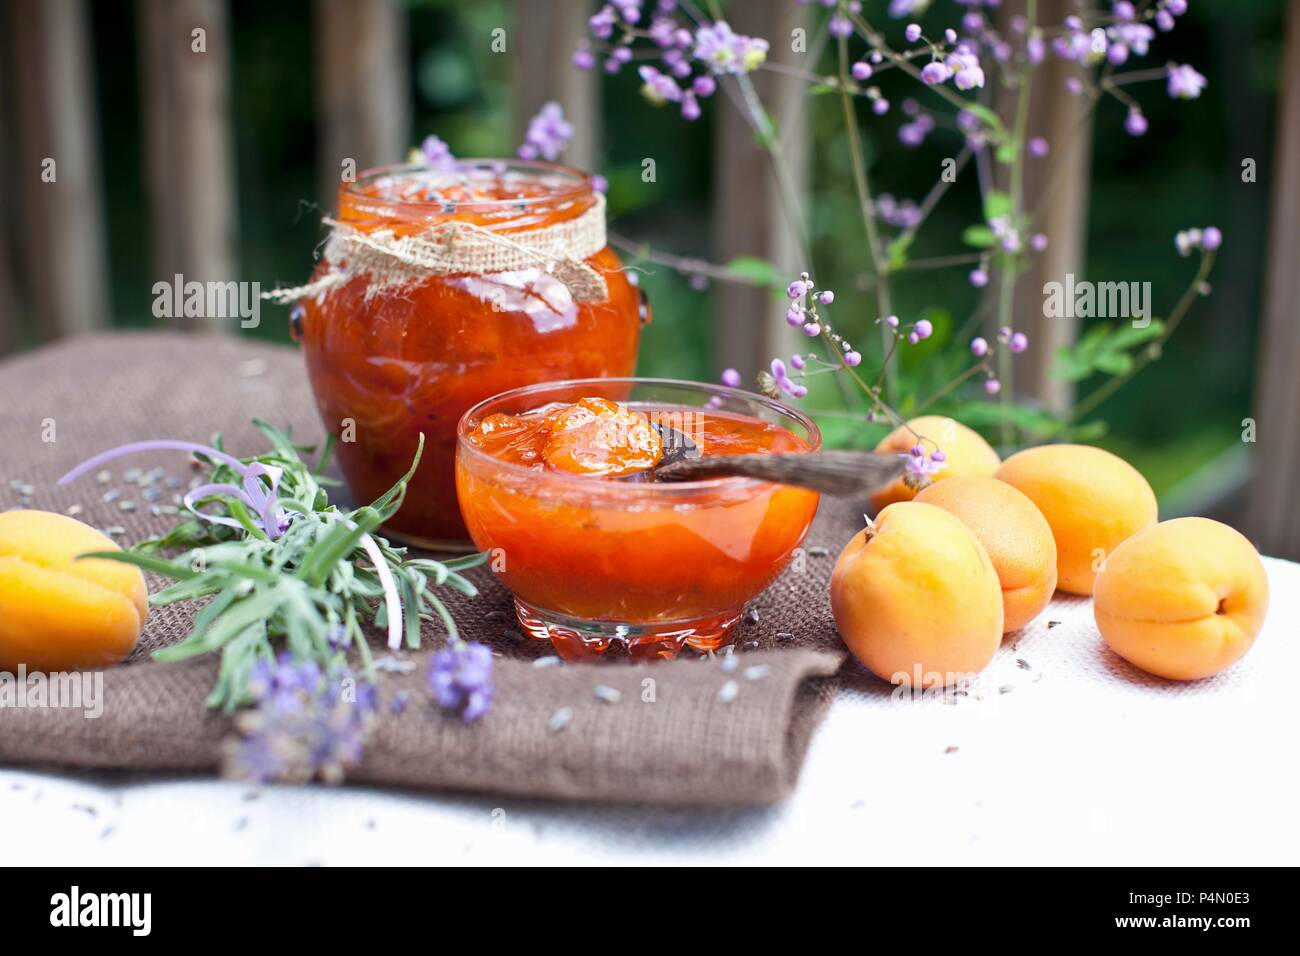 Homemade Apricot Jam with Fresh Apricots and Lavender Stock Photo